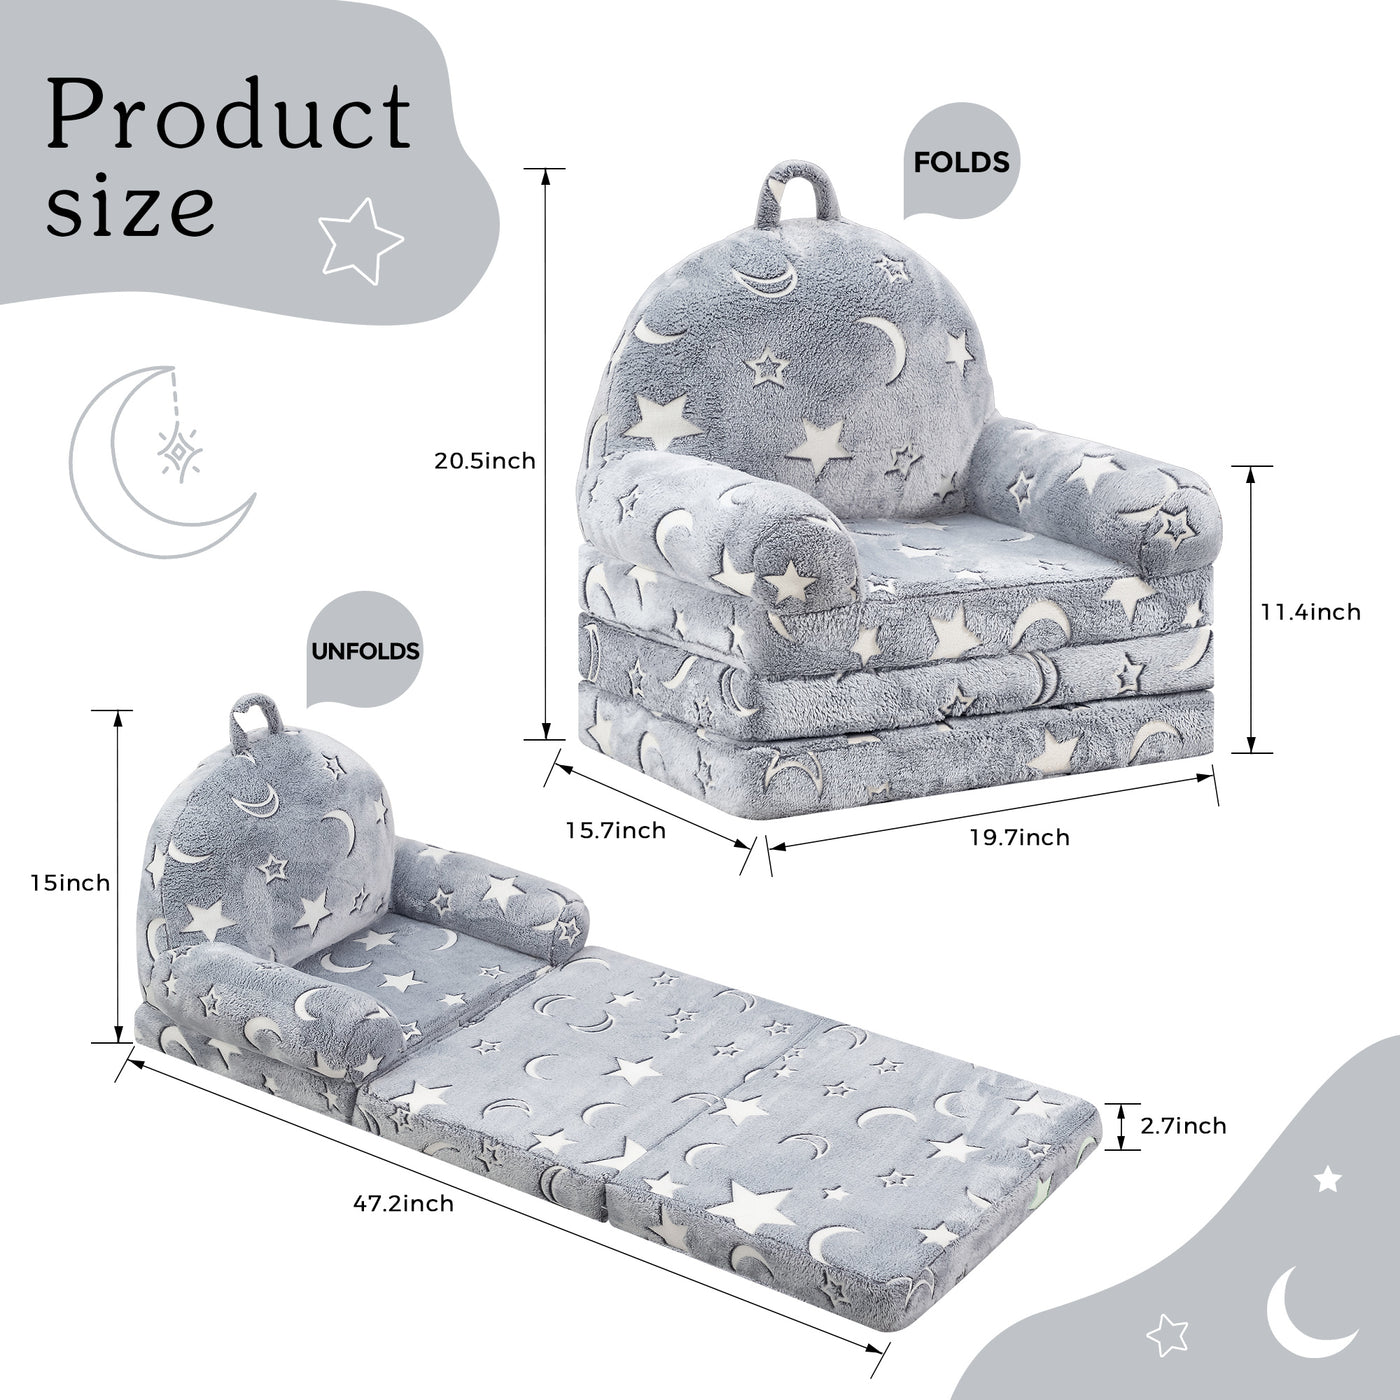 MAXYOYO Foldable Kids Sofa, Shiny Children Couch Backrest Armchair Bed with Pocket, Moon andStar Pattern